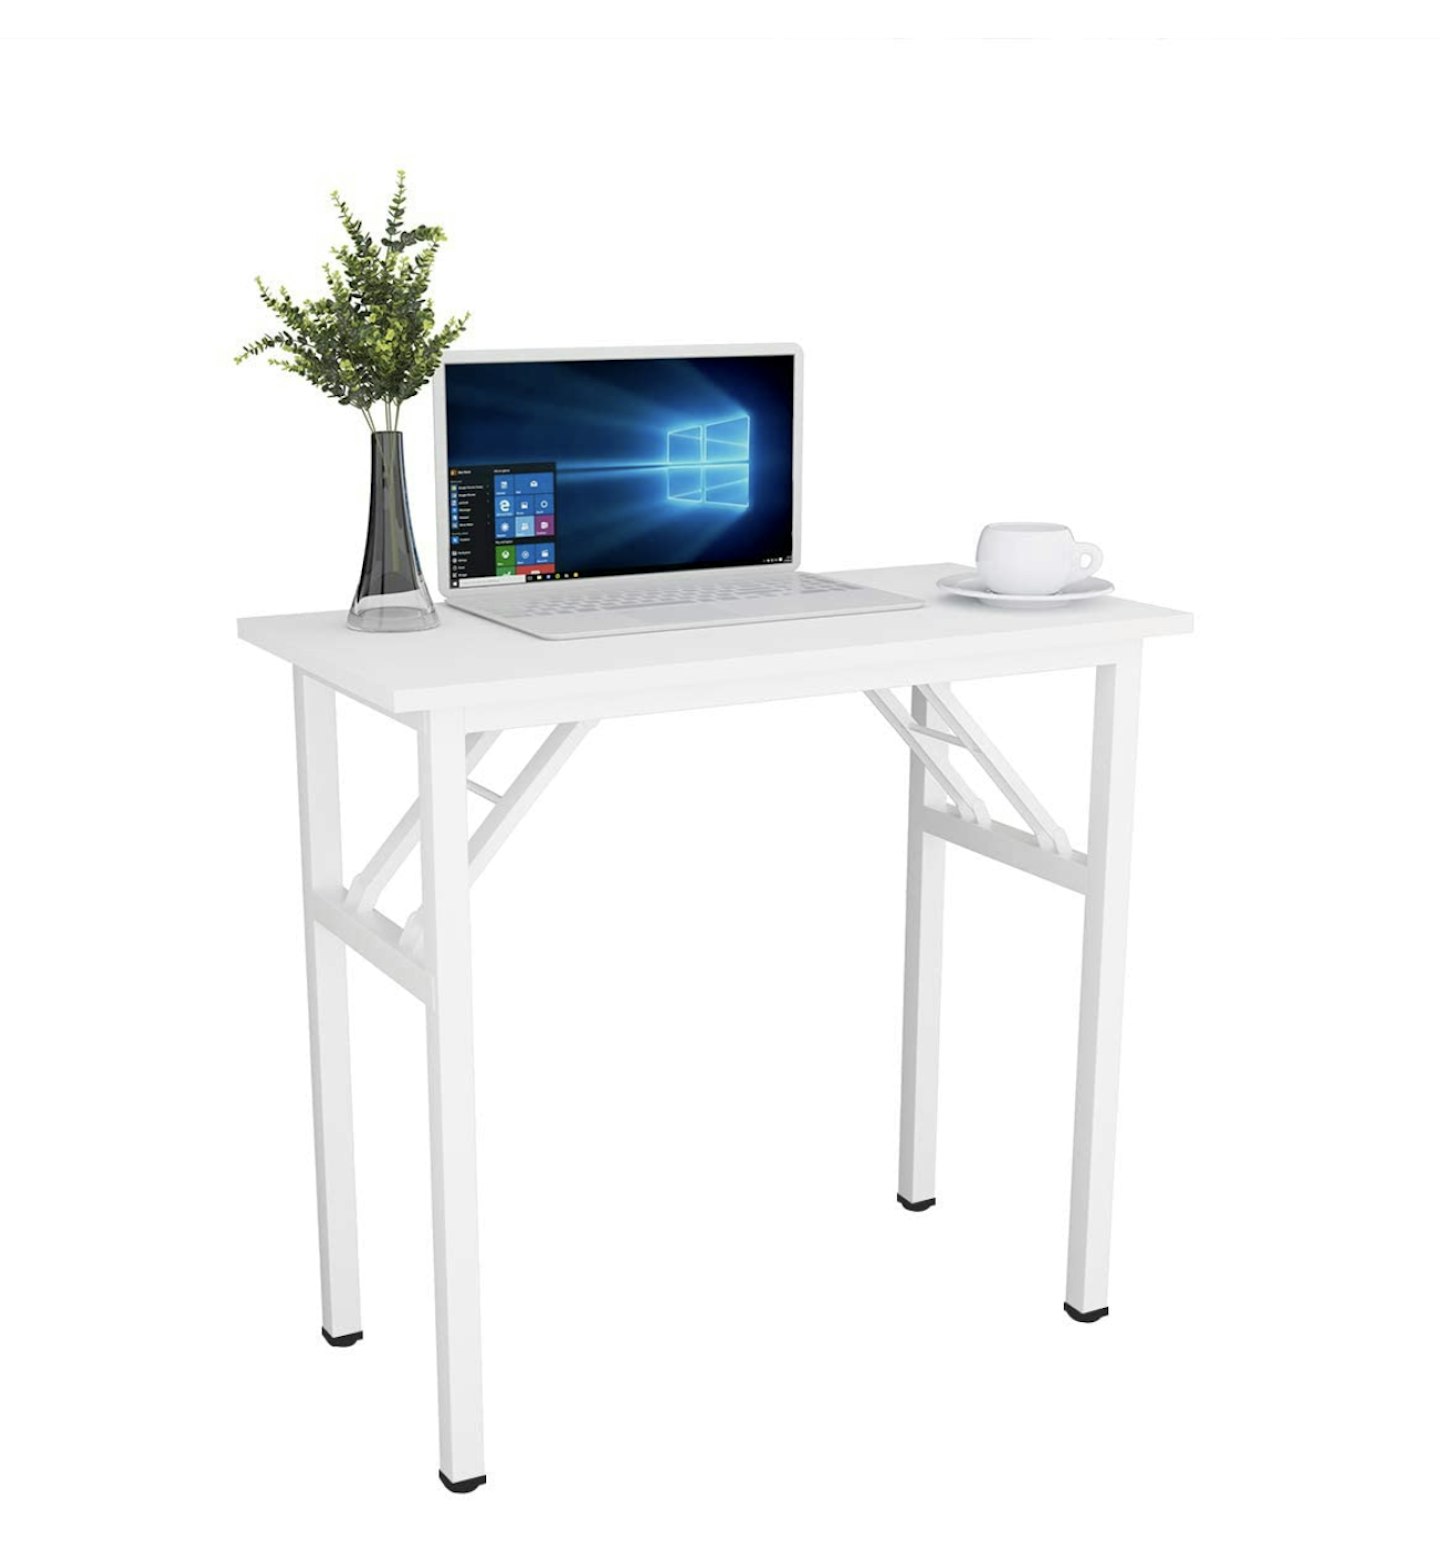 soges Need Folding Table Computer Desk